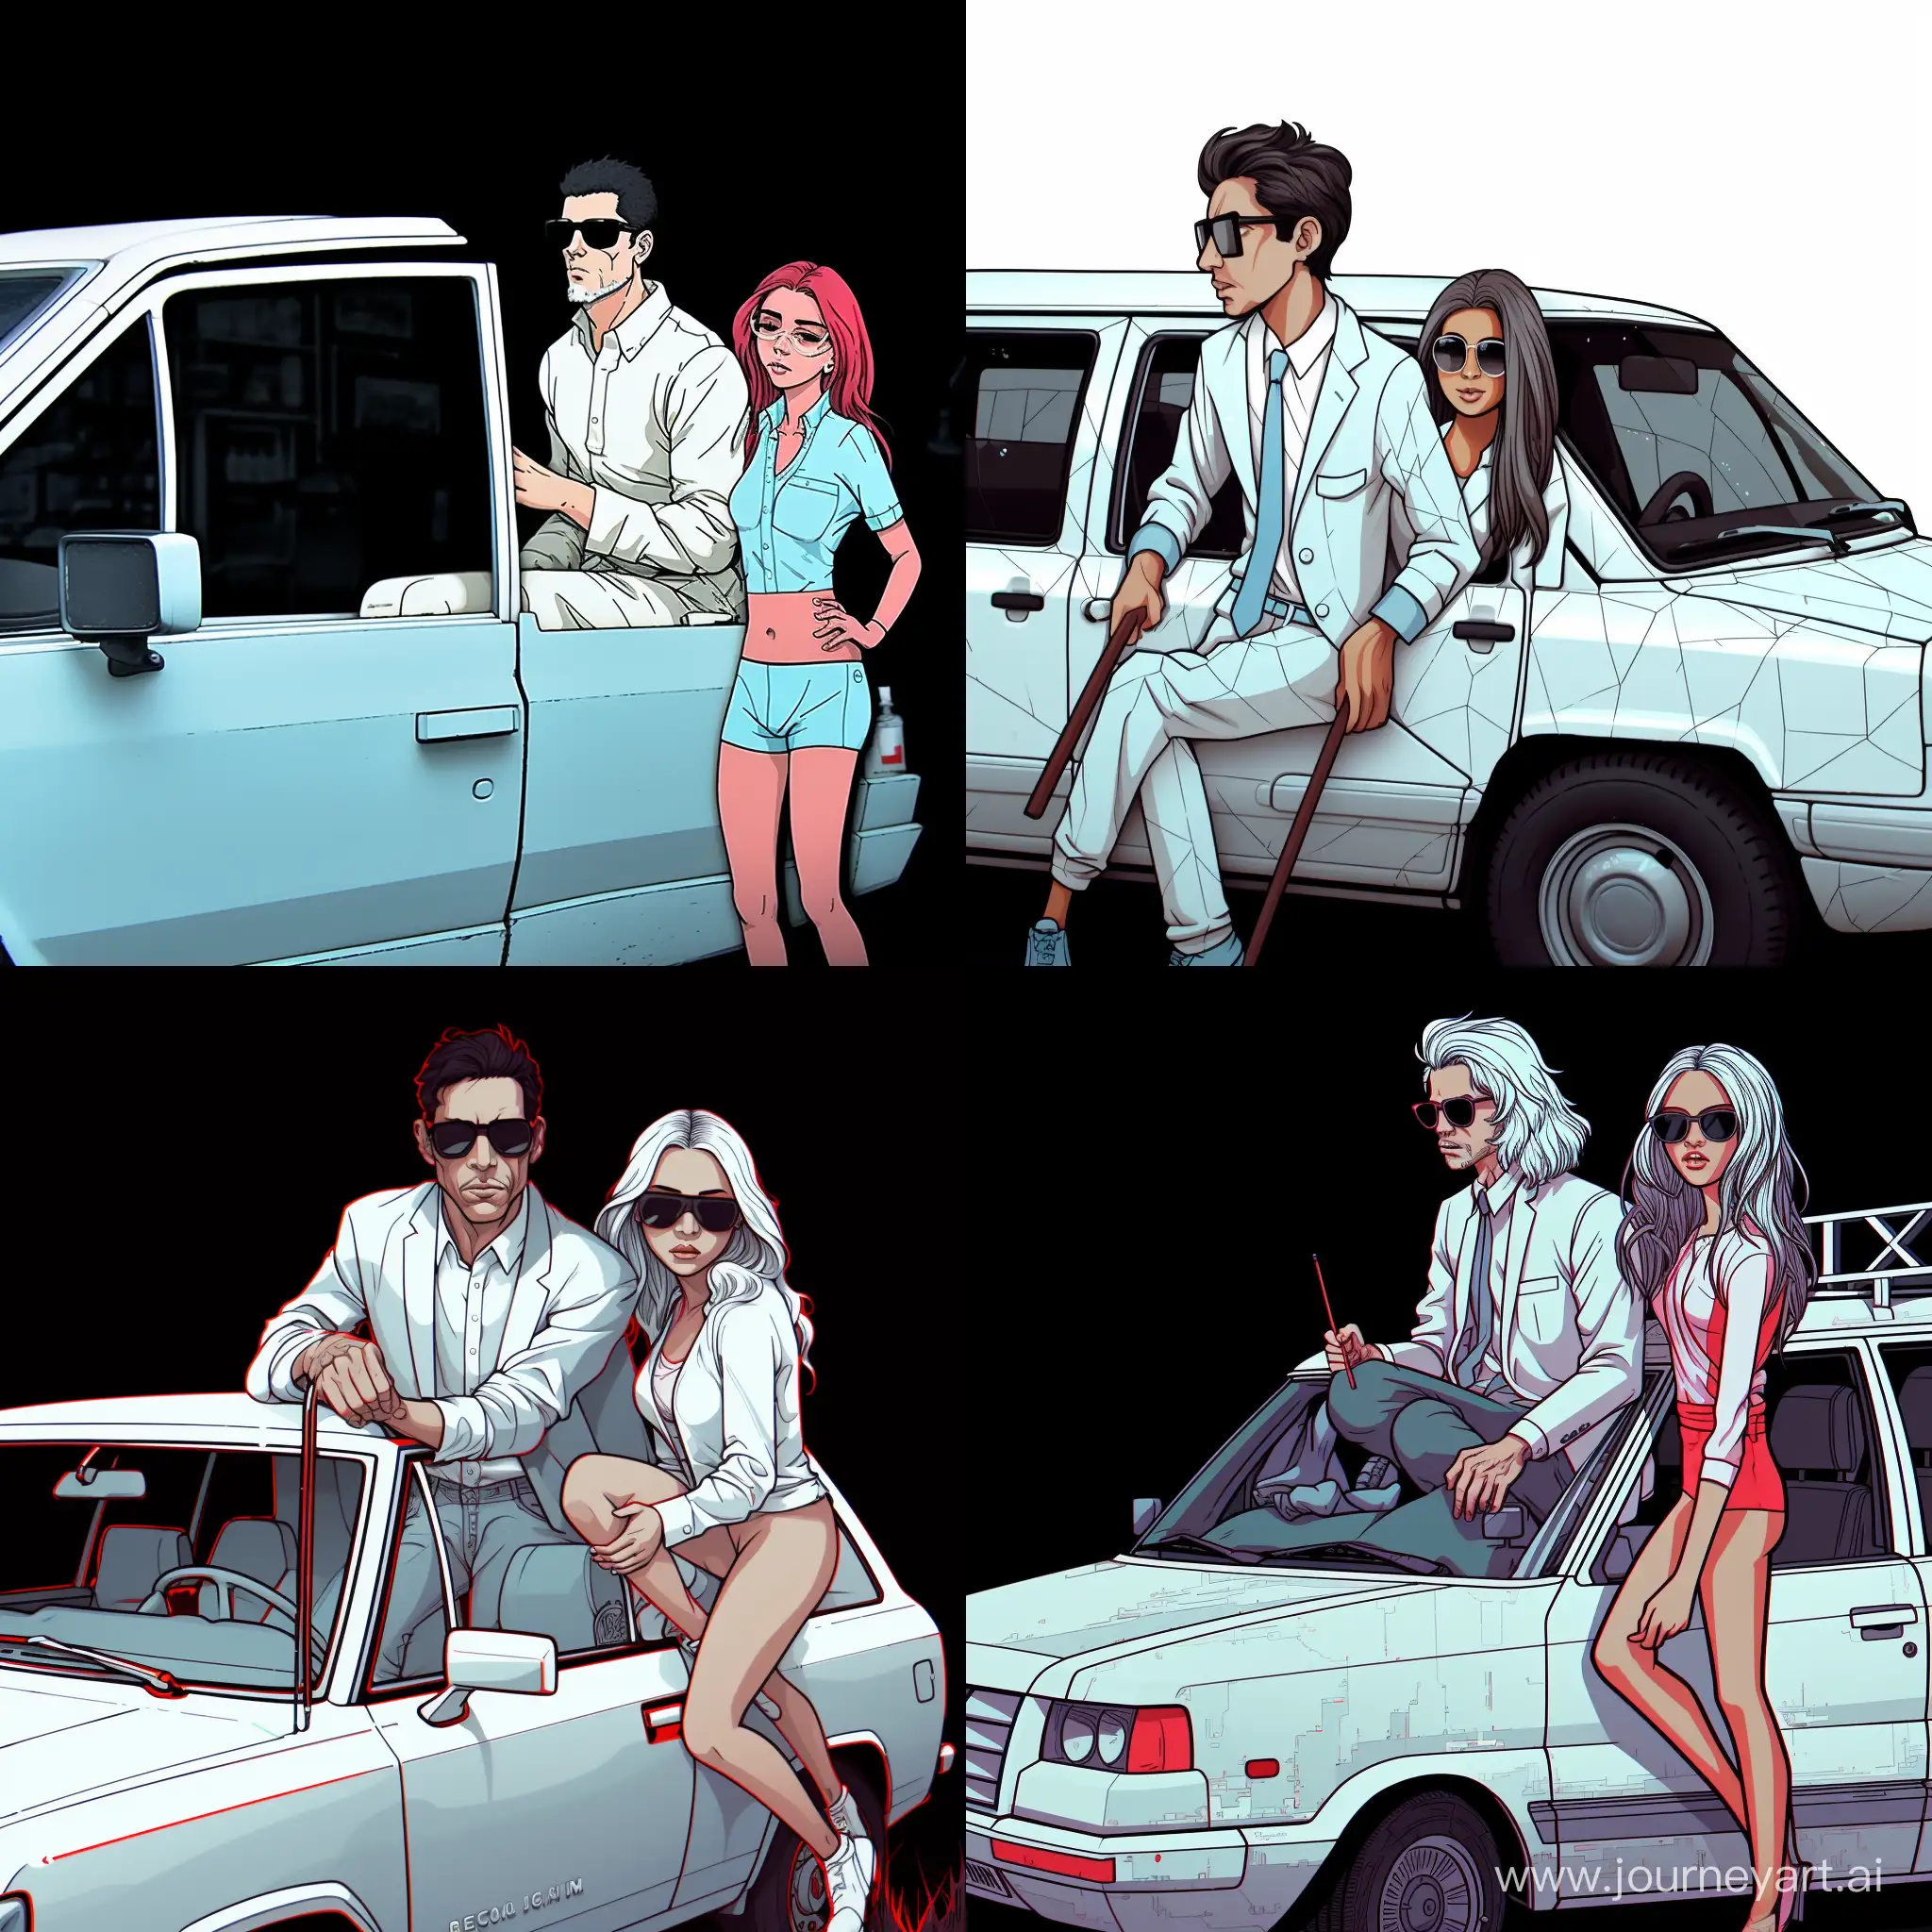 cover art for the track titled "I'll take it away", A white-skinned guy with glasses pushes a girl into a cool car, in cyberpunk style, 3d